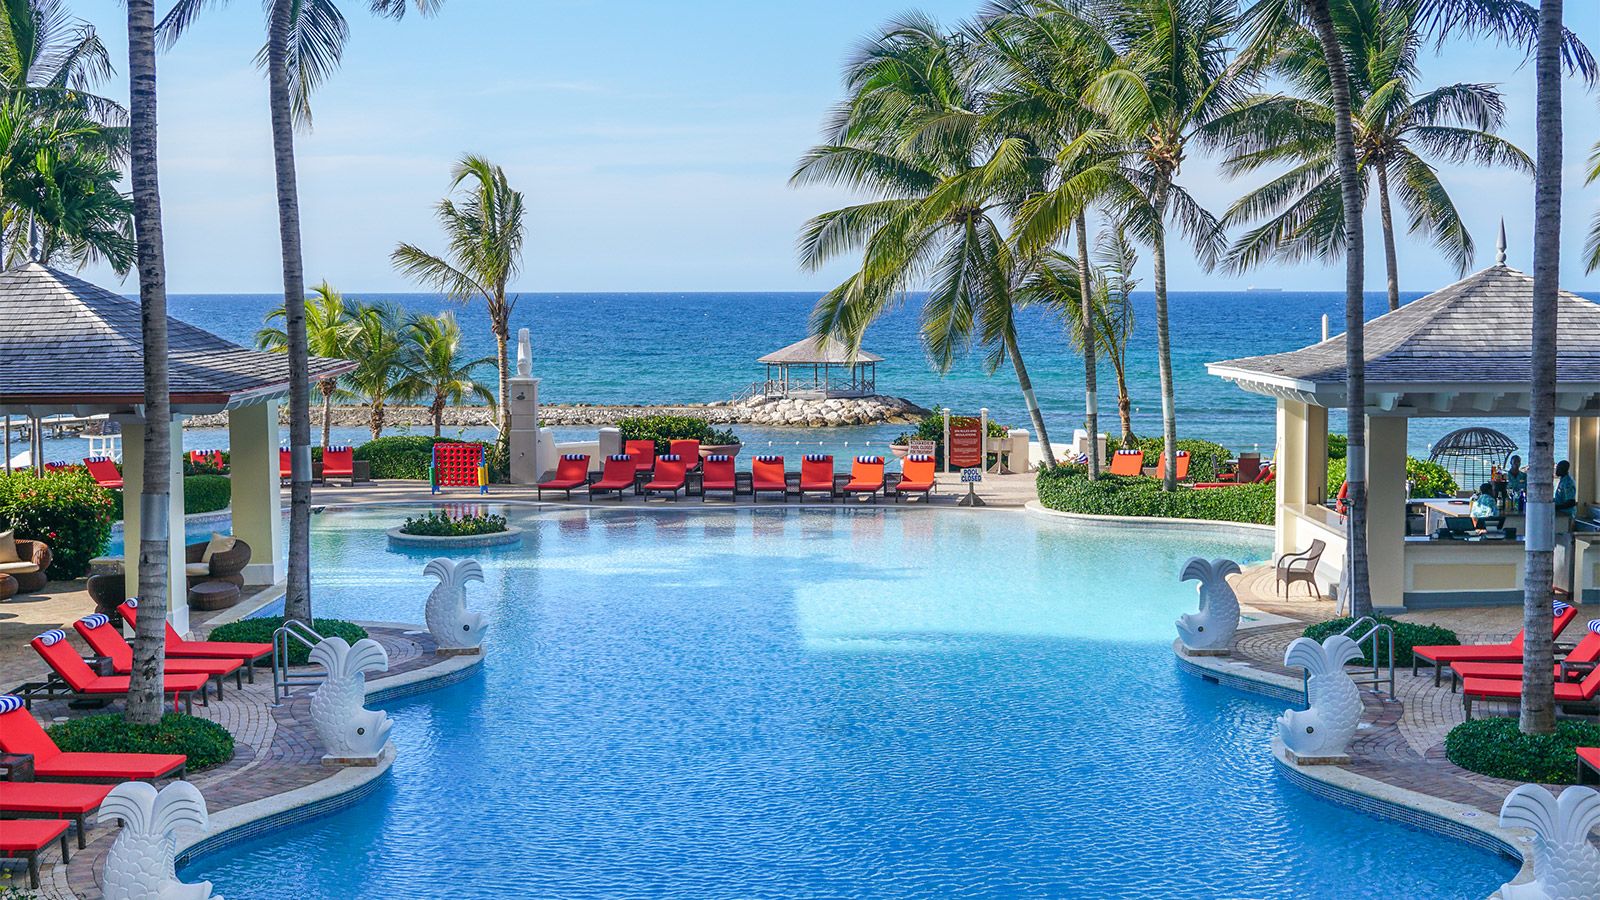 10 Best Resorts In Montego Bay To Book For The Hottest Jamaica